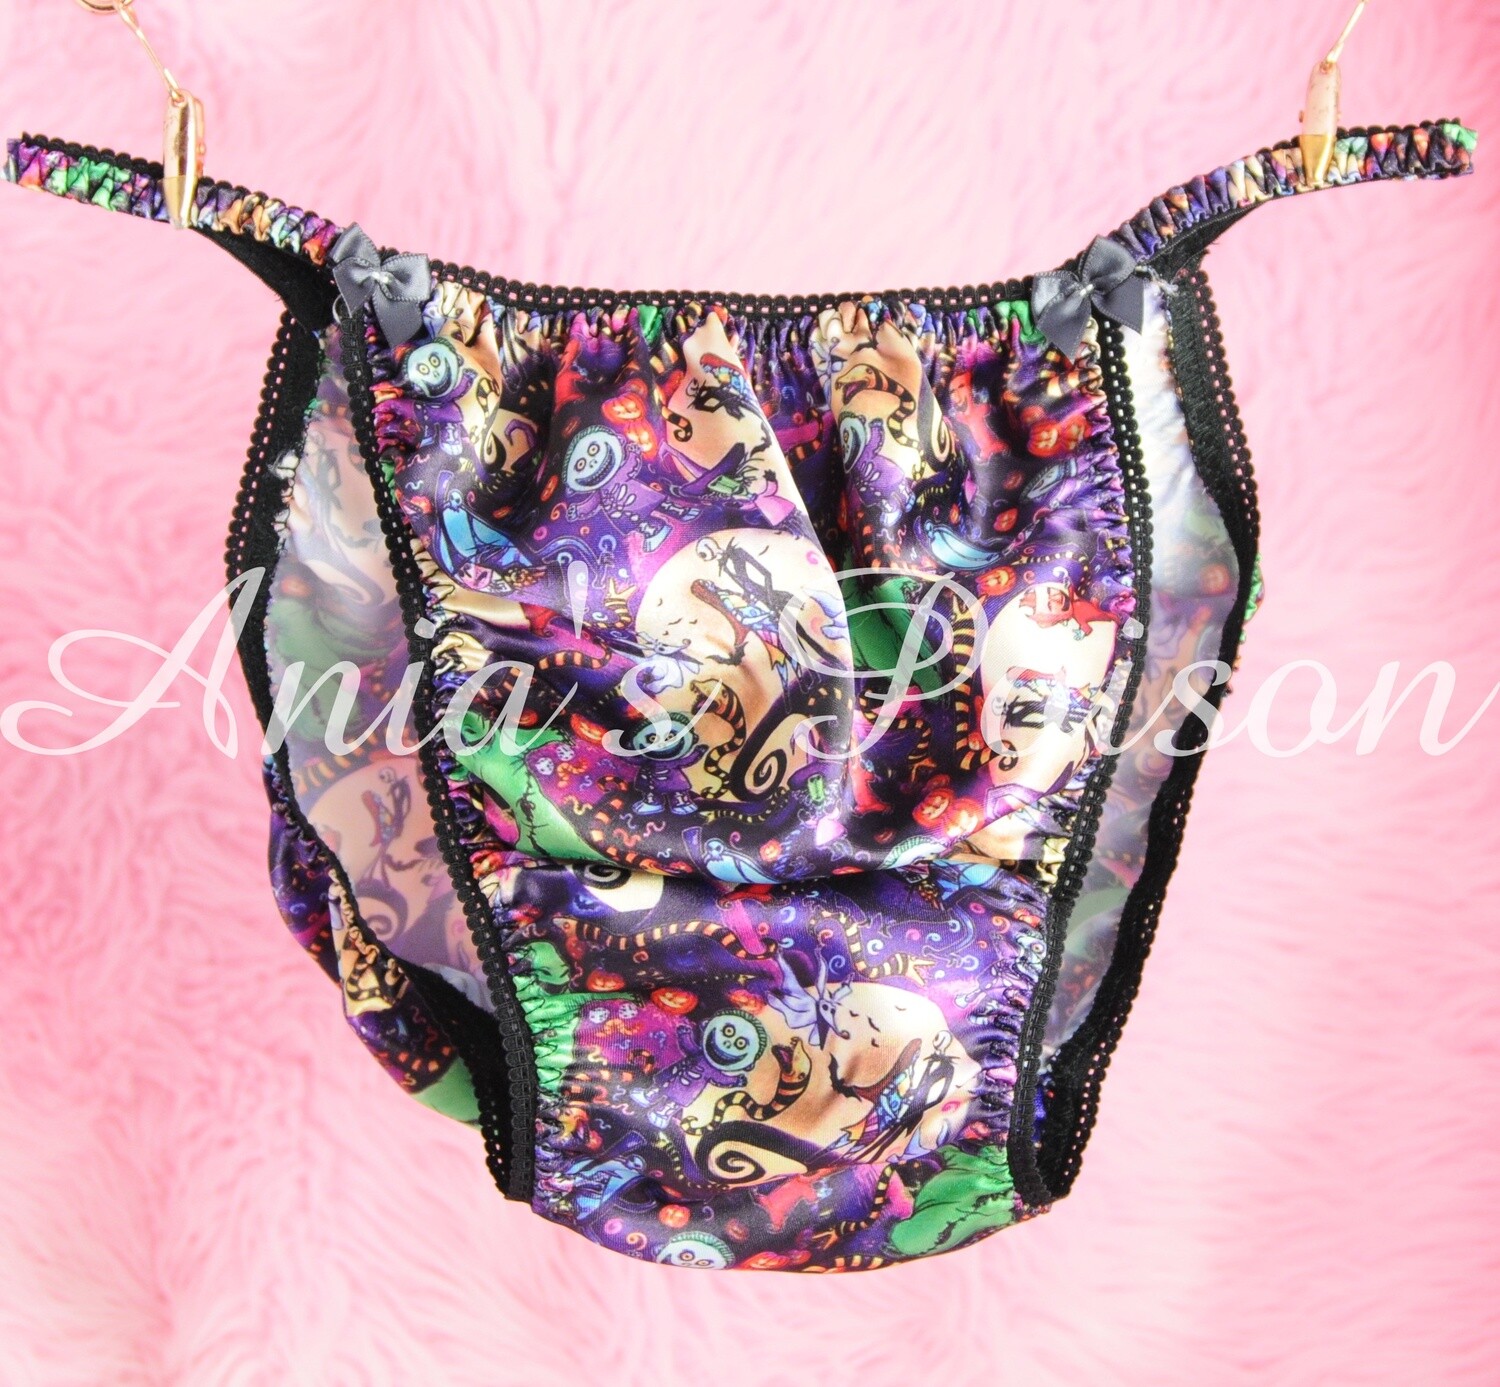 Ania's Poison Jack Skellington and friends bright and beautiful Halloween Print Super Rare 100% polyester SATIN string bikini sissy mens underwear panties SUPER LIMITED!